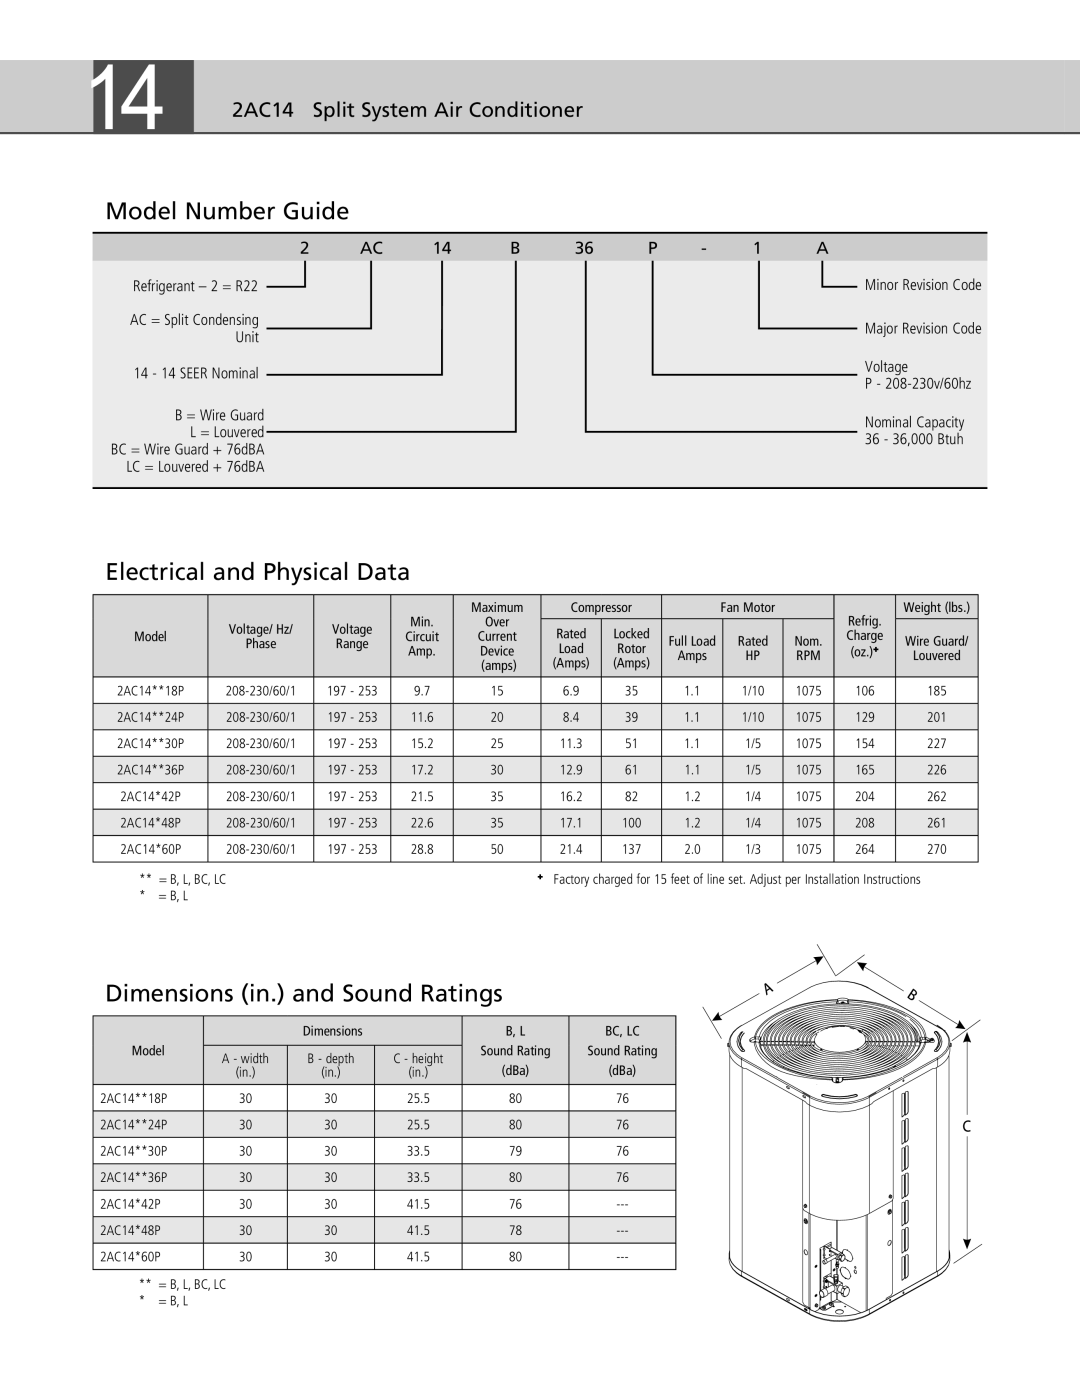 Ducane LC, BC Model Number Guide, Electrical and Physical Data, Dimensions in. and Sound Ratings, 14 - 14 SEER Nominal 